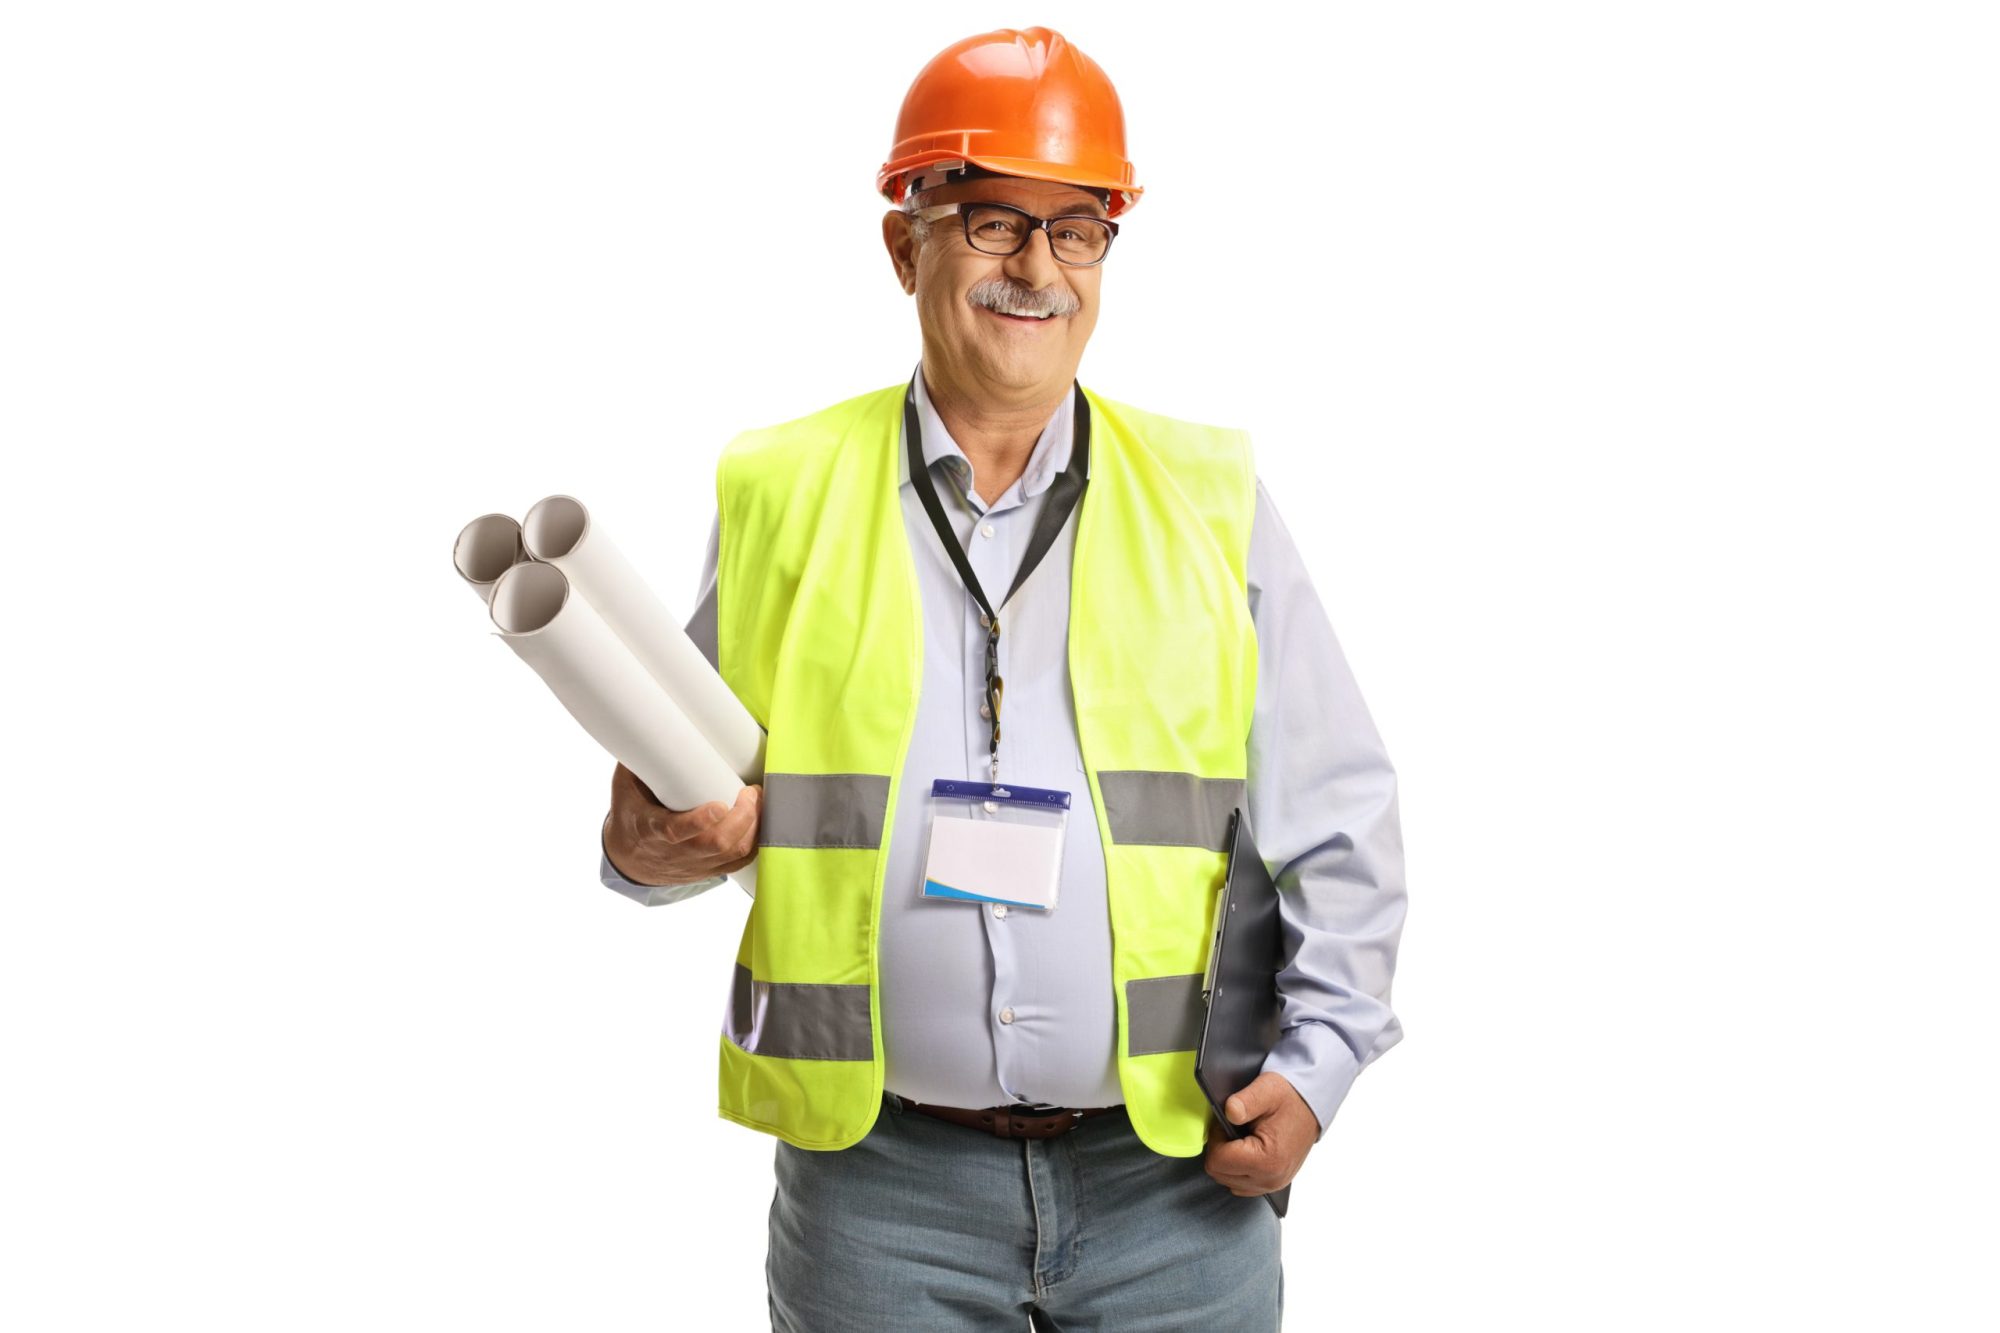 Smiling mature male engineer with a safety vest and hardhat holding blueprints isolated on white background